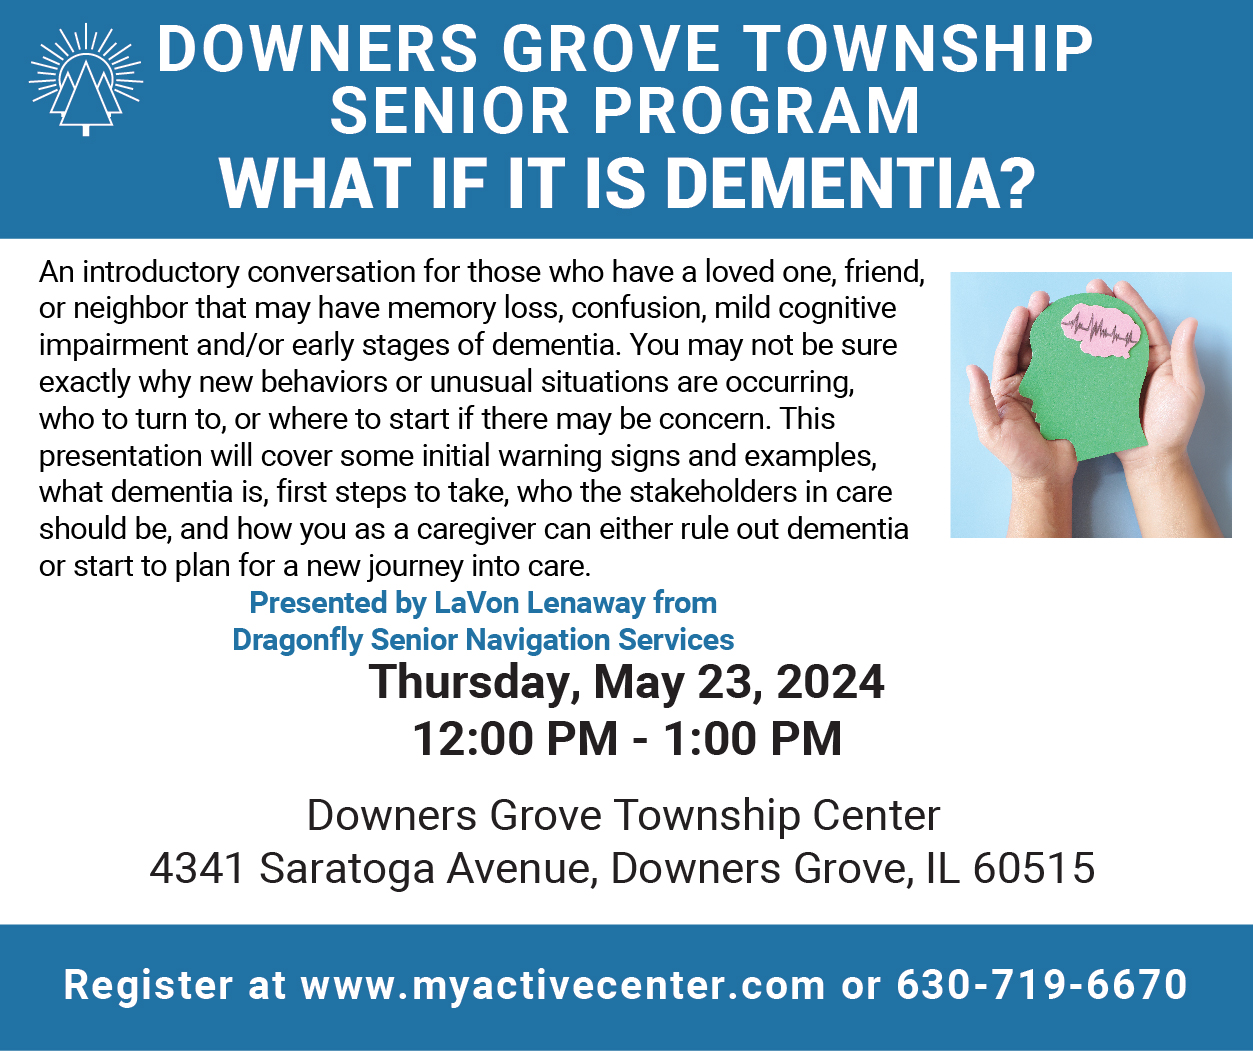 Downers Grove Township